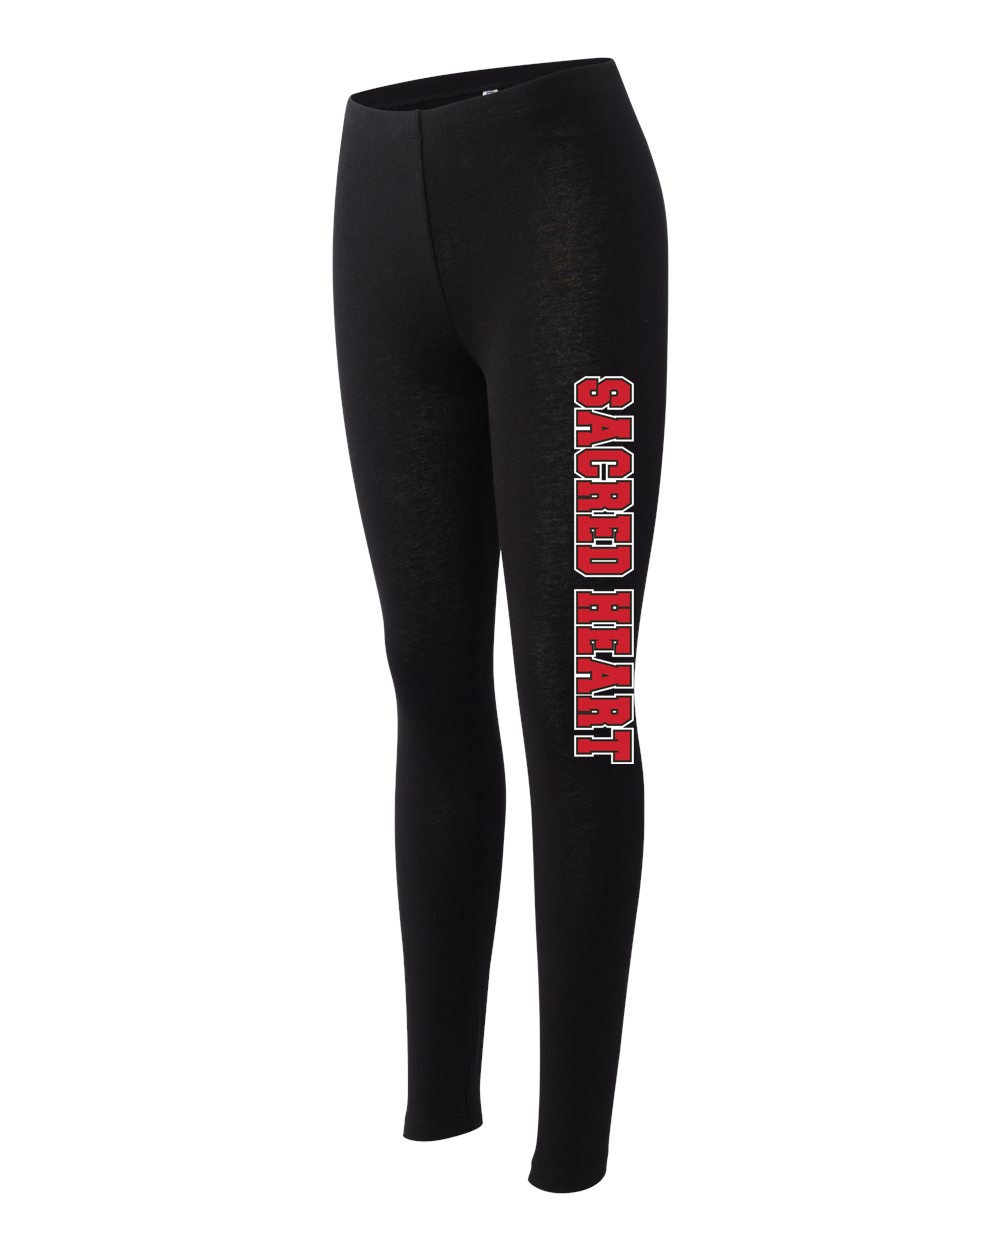 SHS Staff Wear Leggings w/ White Logo - Please Allow 2-3 Weeks for Delivery